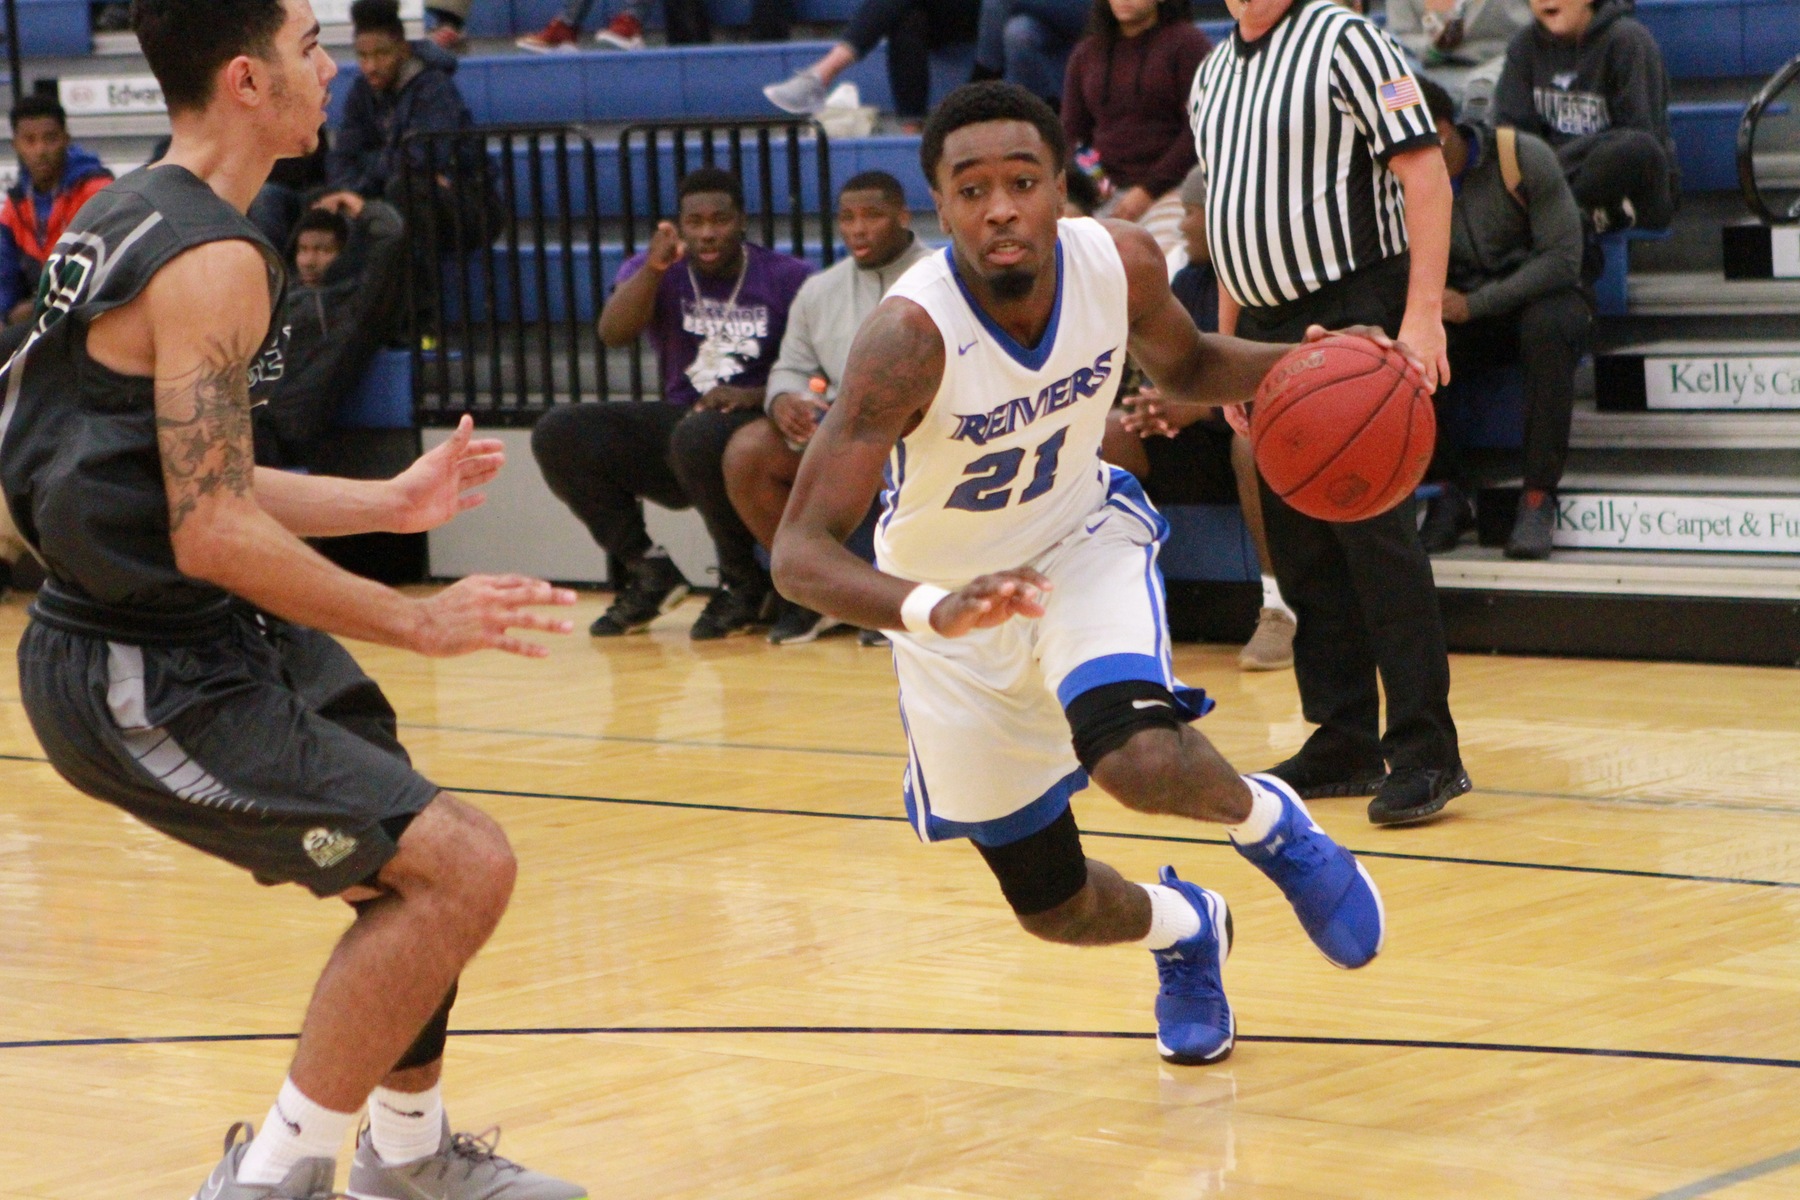 Iowa Western's Shaun Doss was one of seven Reivers to score in double figures in Tuesday's (11/14) 109-76 victory over Central (NE) at Kanesville Arena.